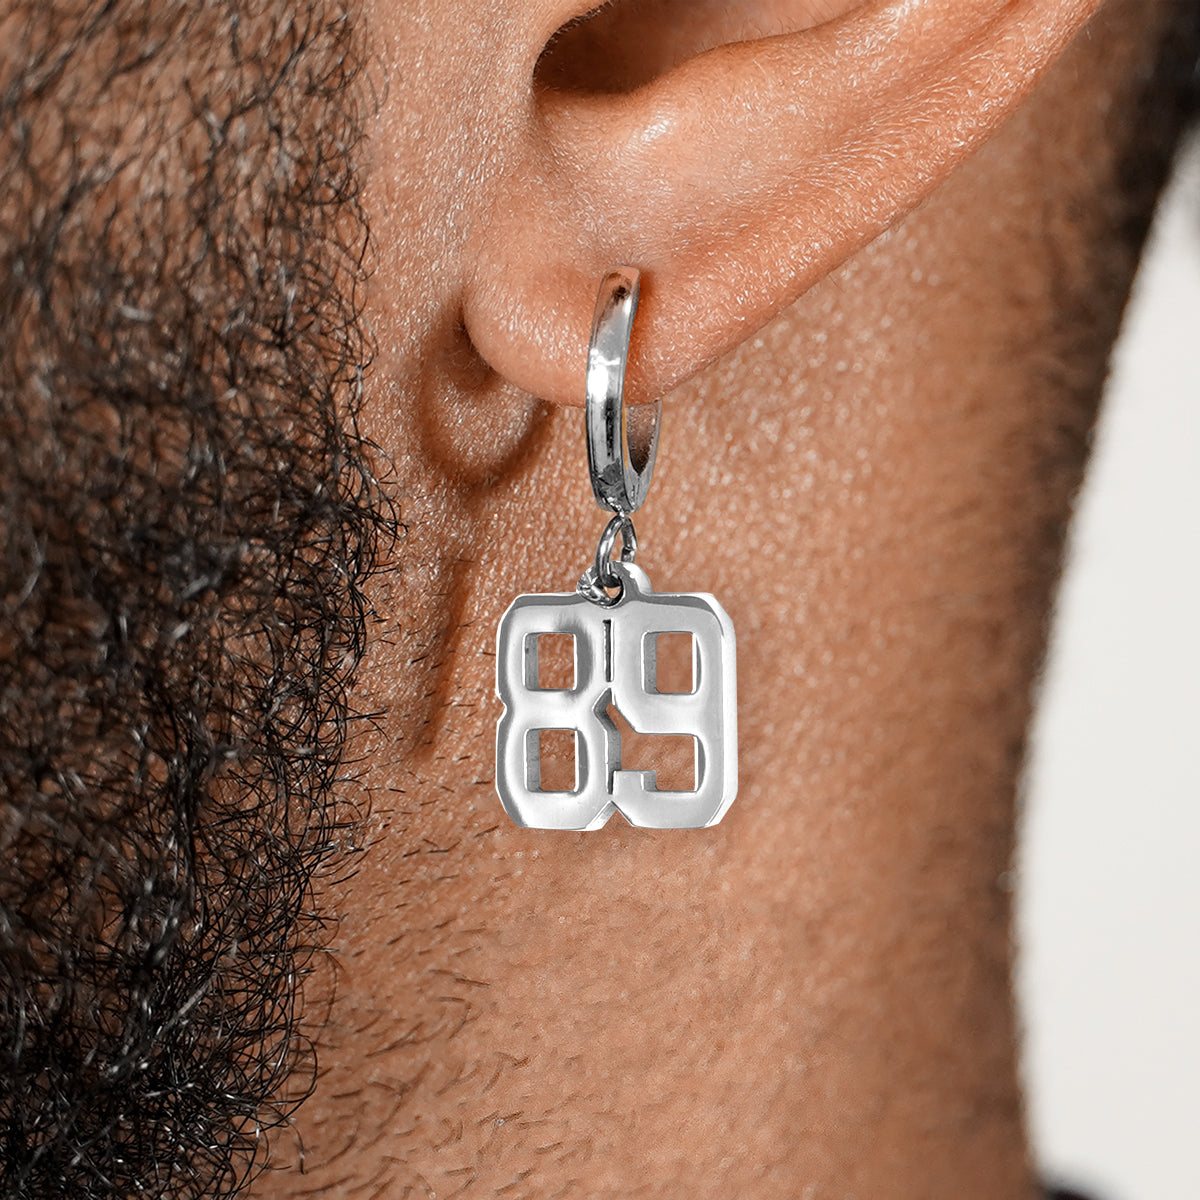 89 Number Earring - Stainless Steel